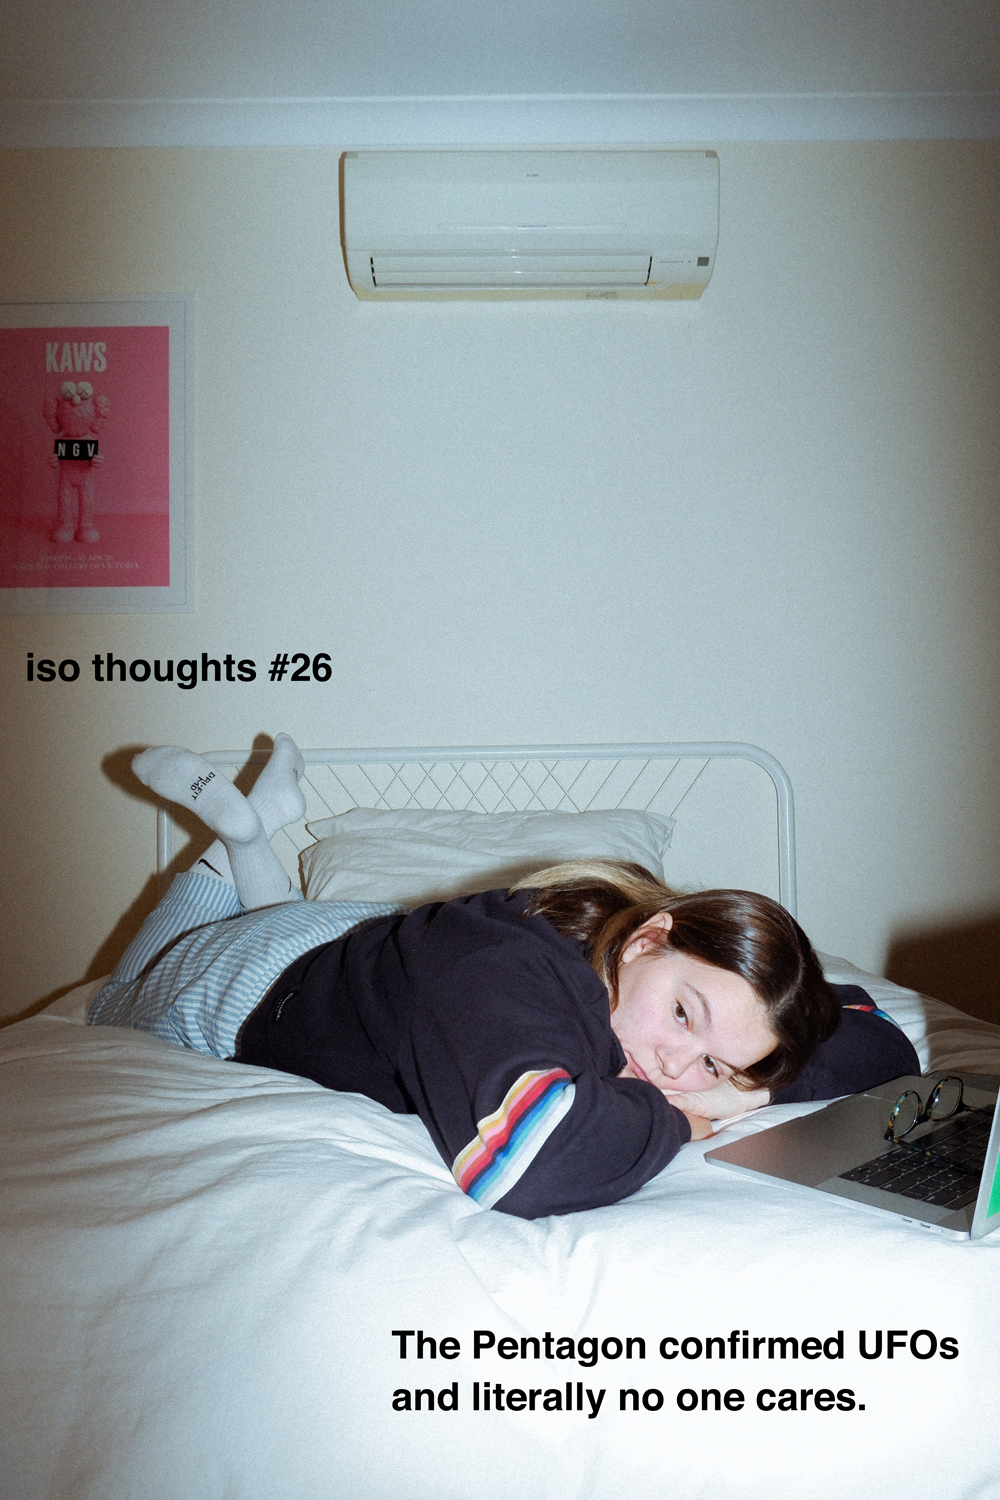 Colour photograph depicting young woman lying on bed with laptop. Text overlays the image.